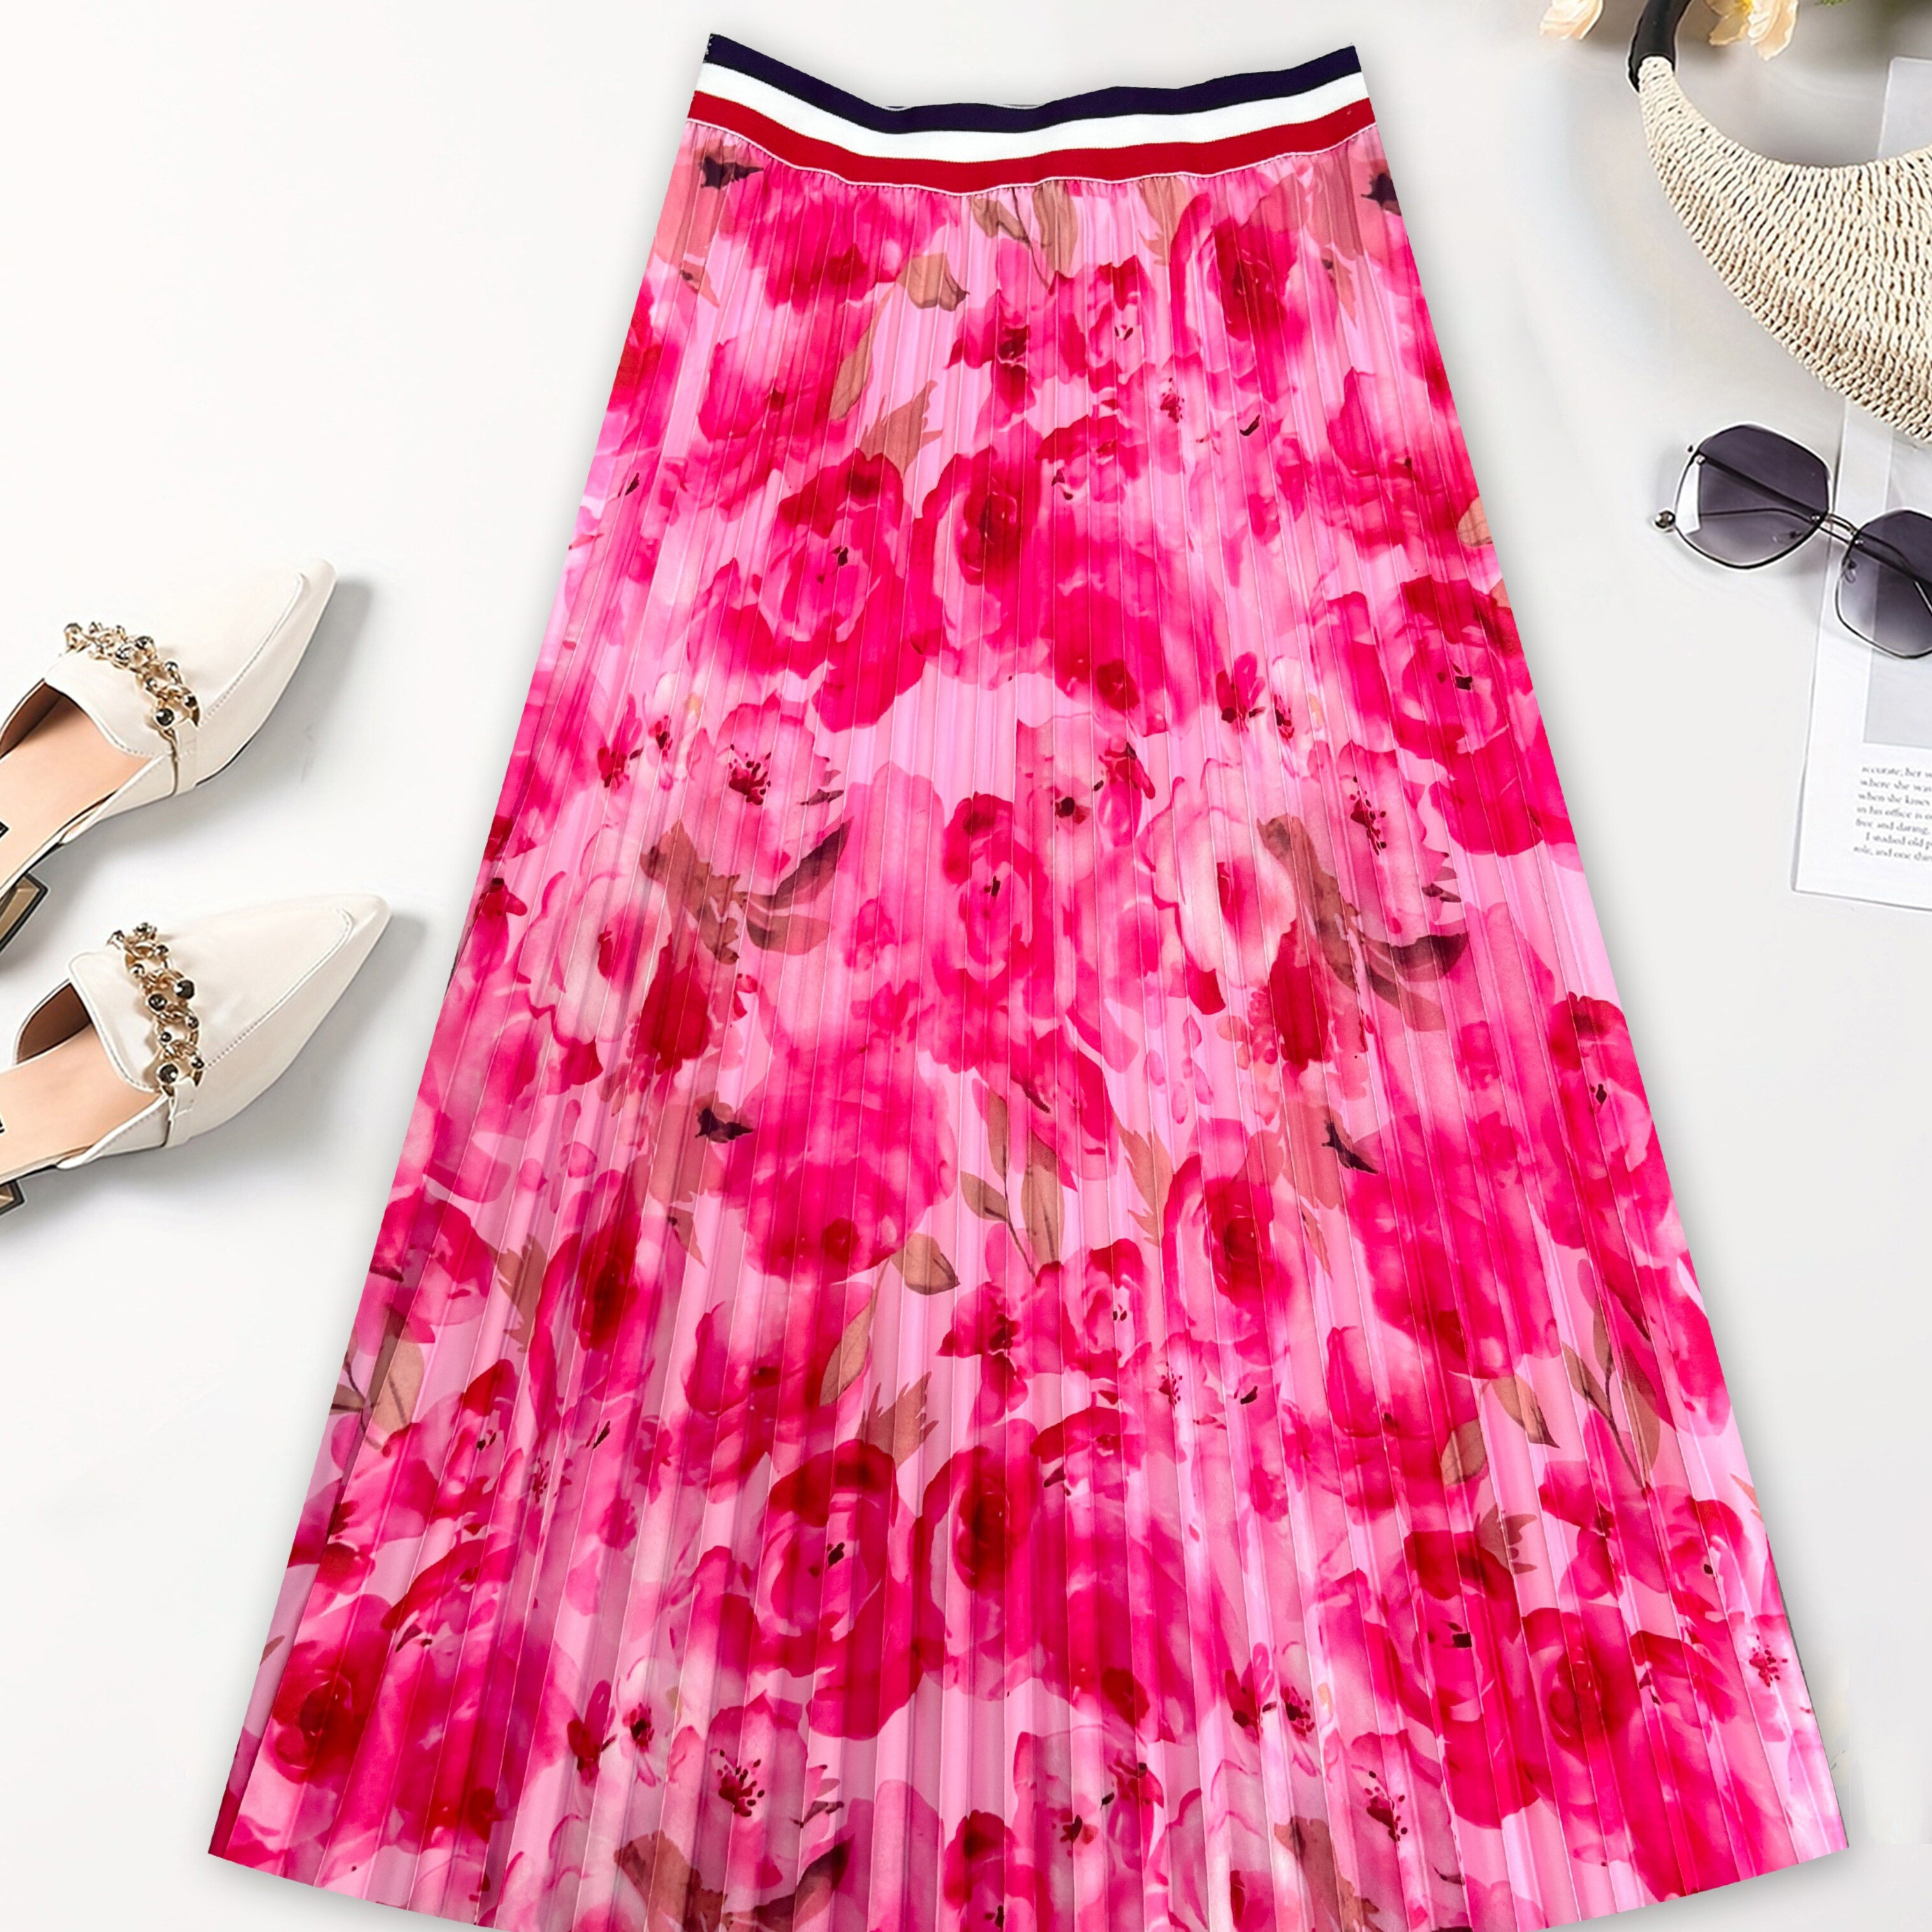 

Floral Print High Waist Pleated Skirt, Casual A-line Midi Skirt For Spring & Summer, Women's Clothing